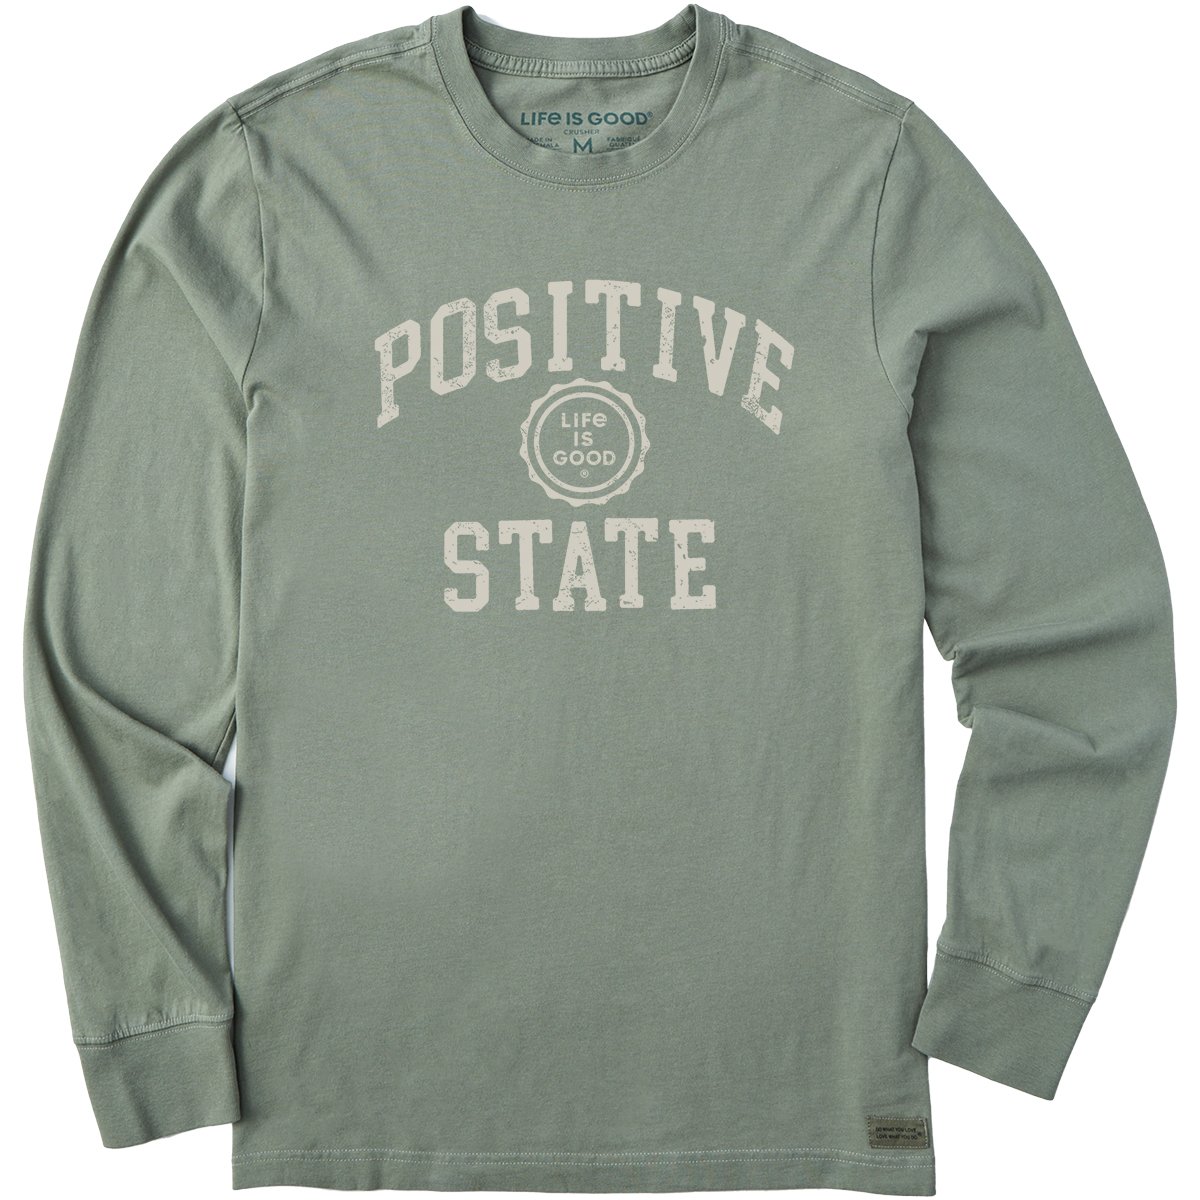 Life Is Good Men's Positive State Long-Sleeve Crusher Tee